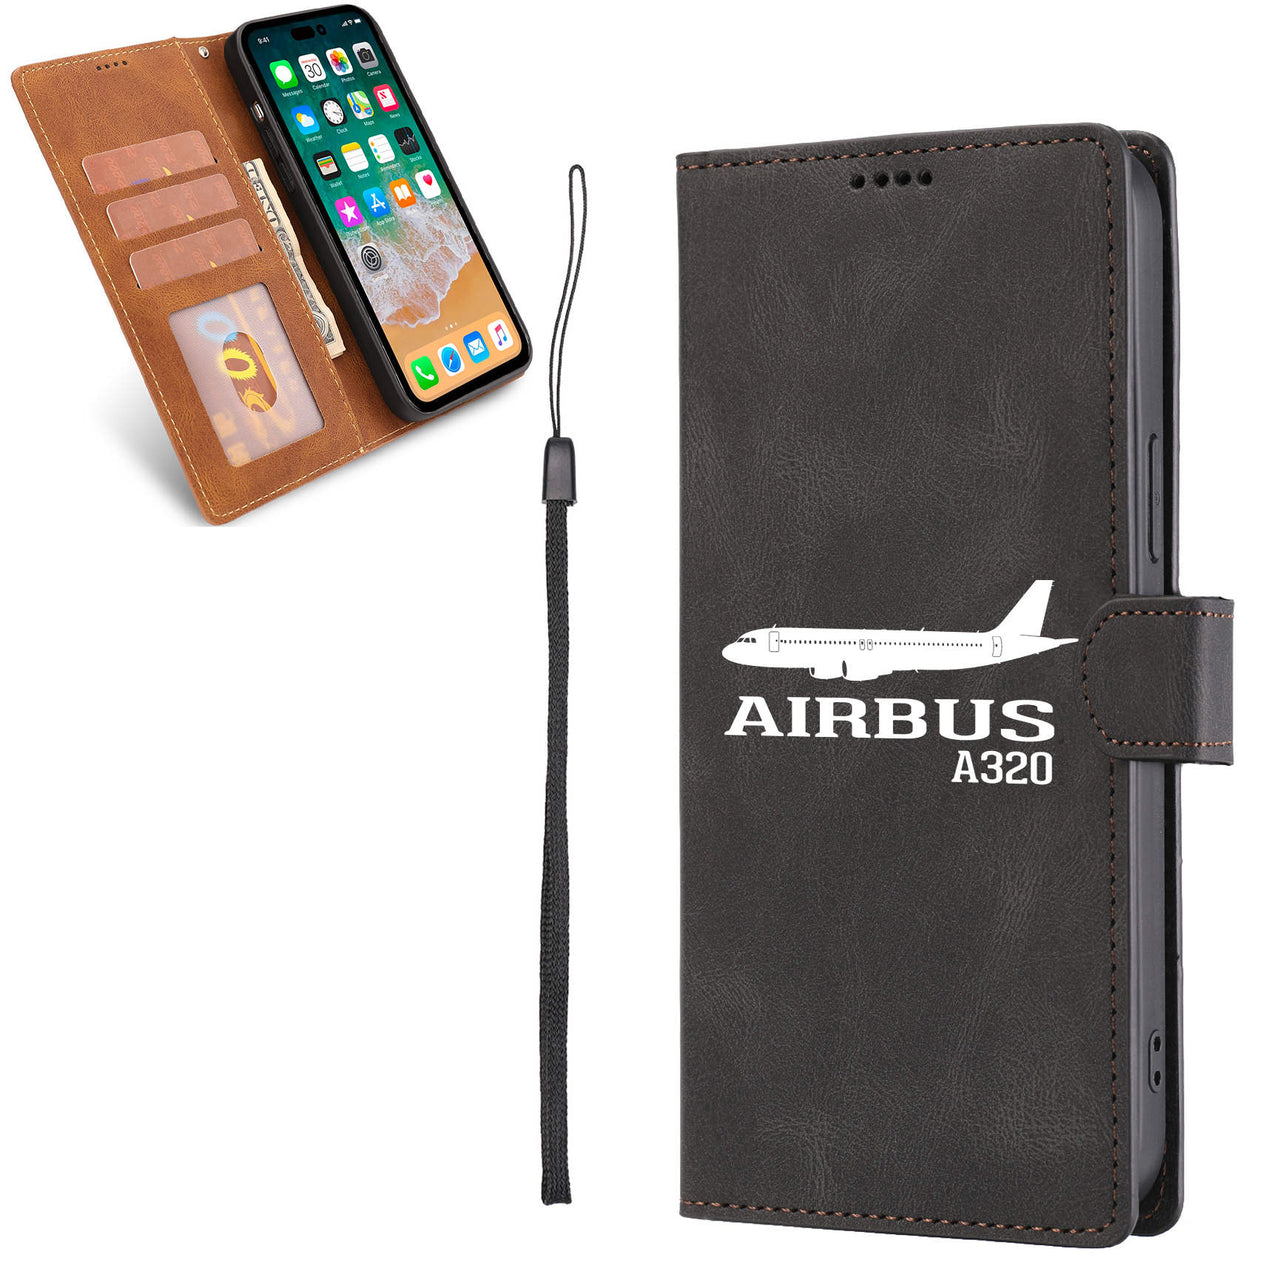 Airbus A320 Printed Designed Leather iPhone Cases